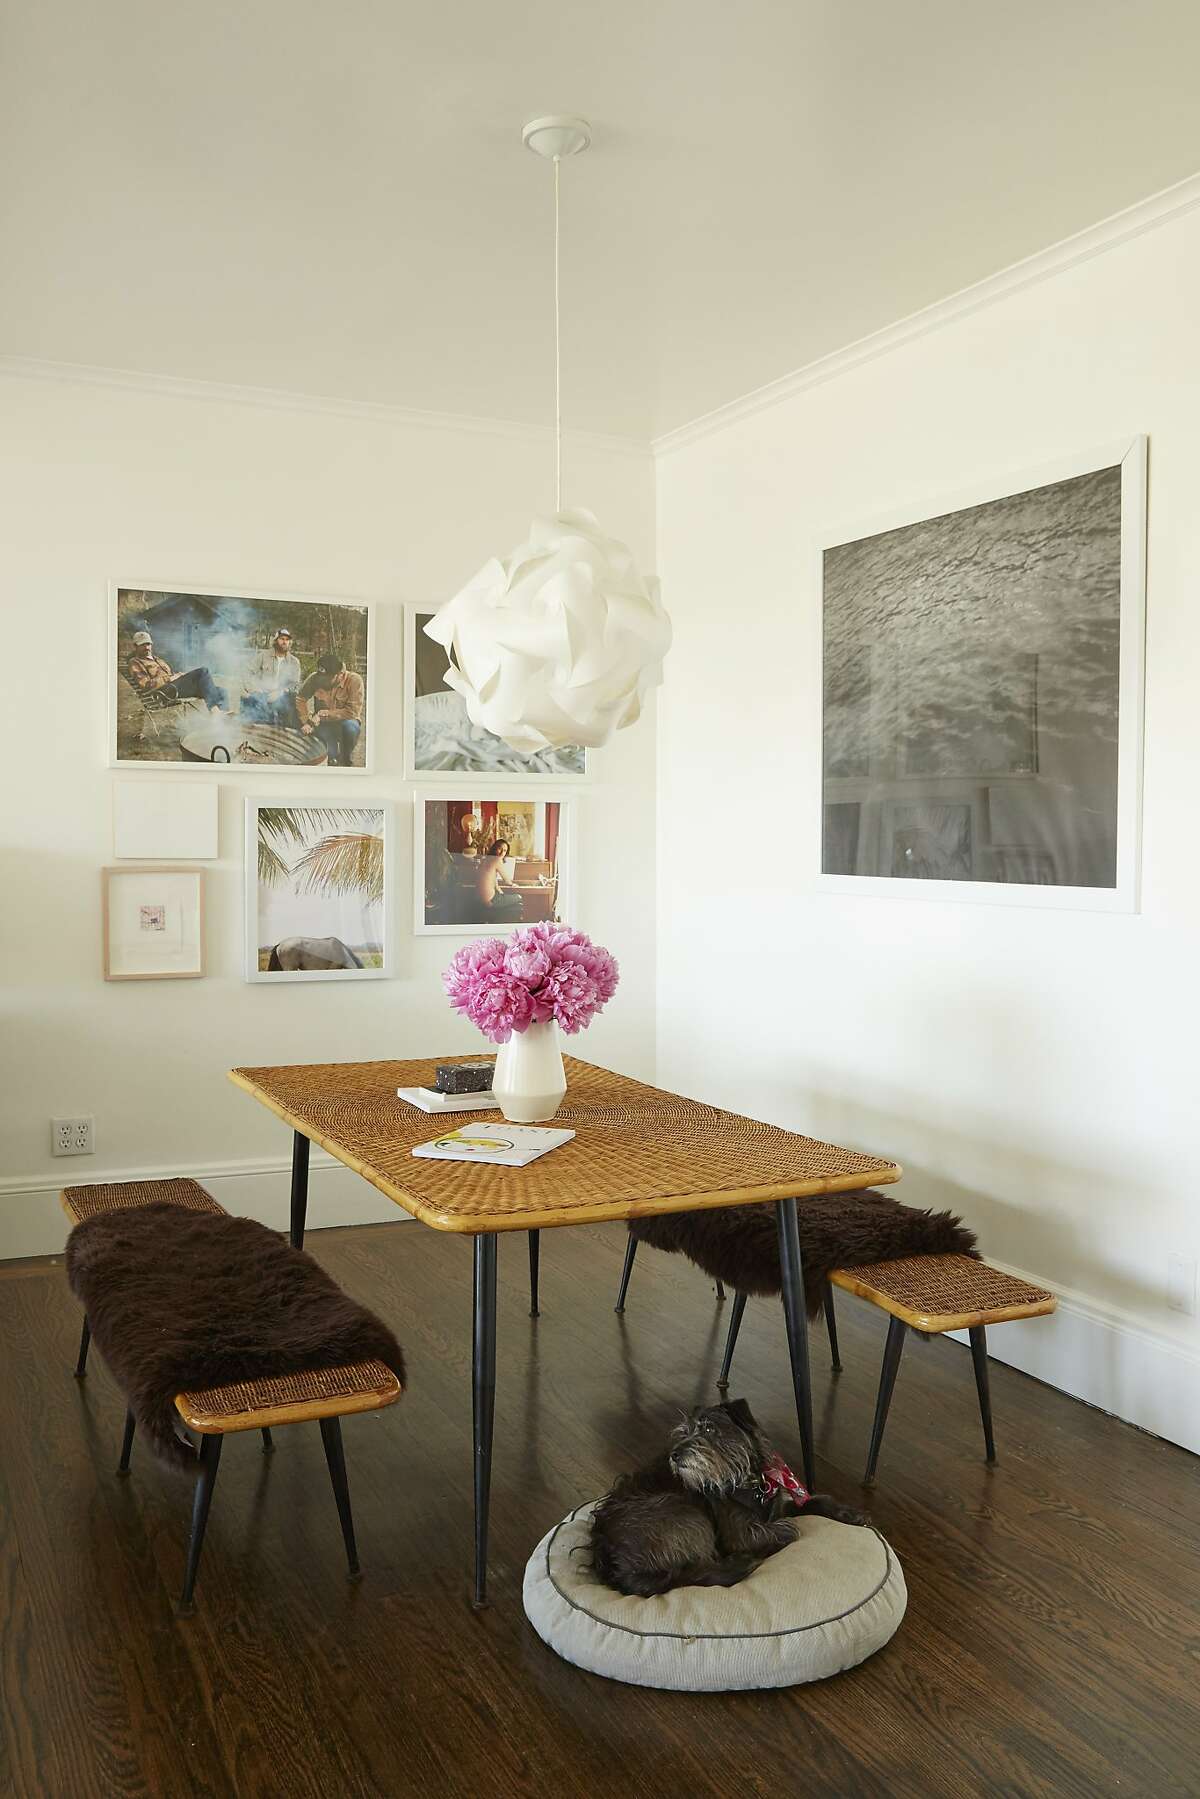 The dining room exhibits Gowdy?•s penchant for texture, where the rattan-topped table and benches from Stuff are topped with sheepskins. The framed art on the walls includes works by friends, as well as a large-scale oceanic poster she picked up at the Whitney Museum years ago.